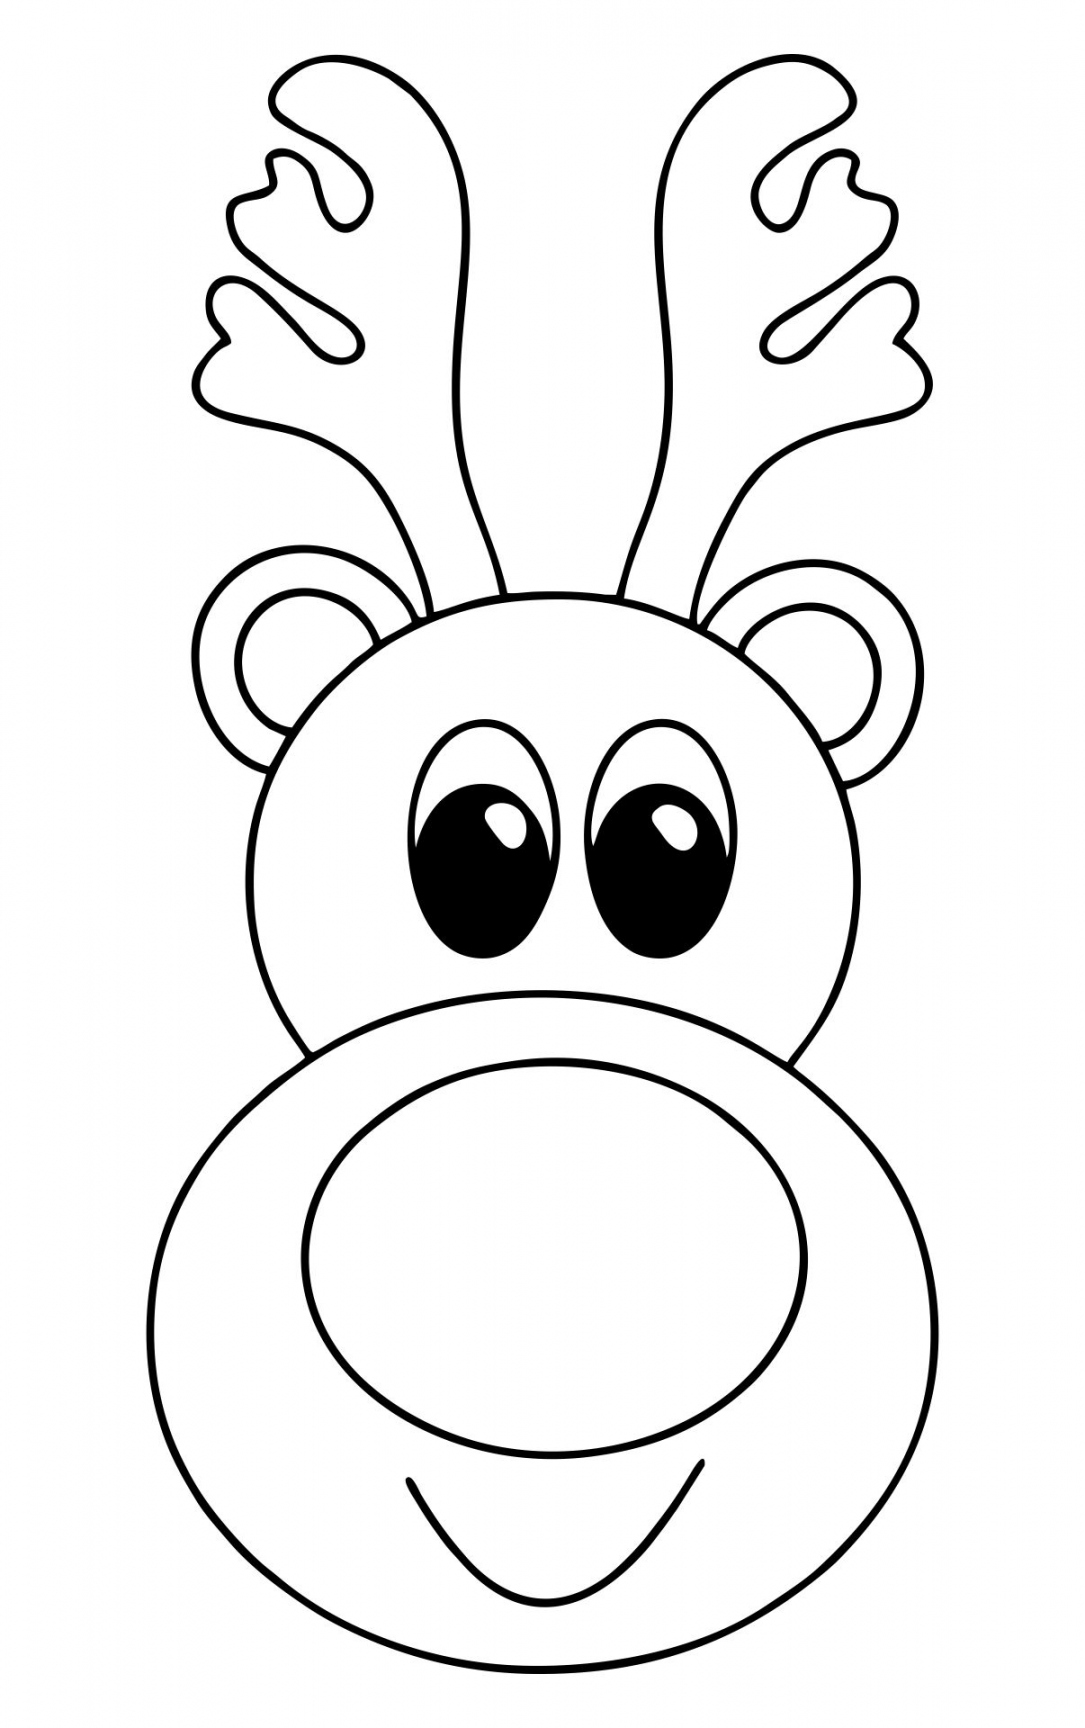 Pin on Crafts - FREE Printables - Reindeer Face Template